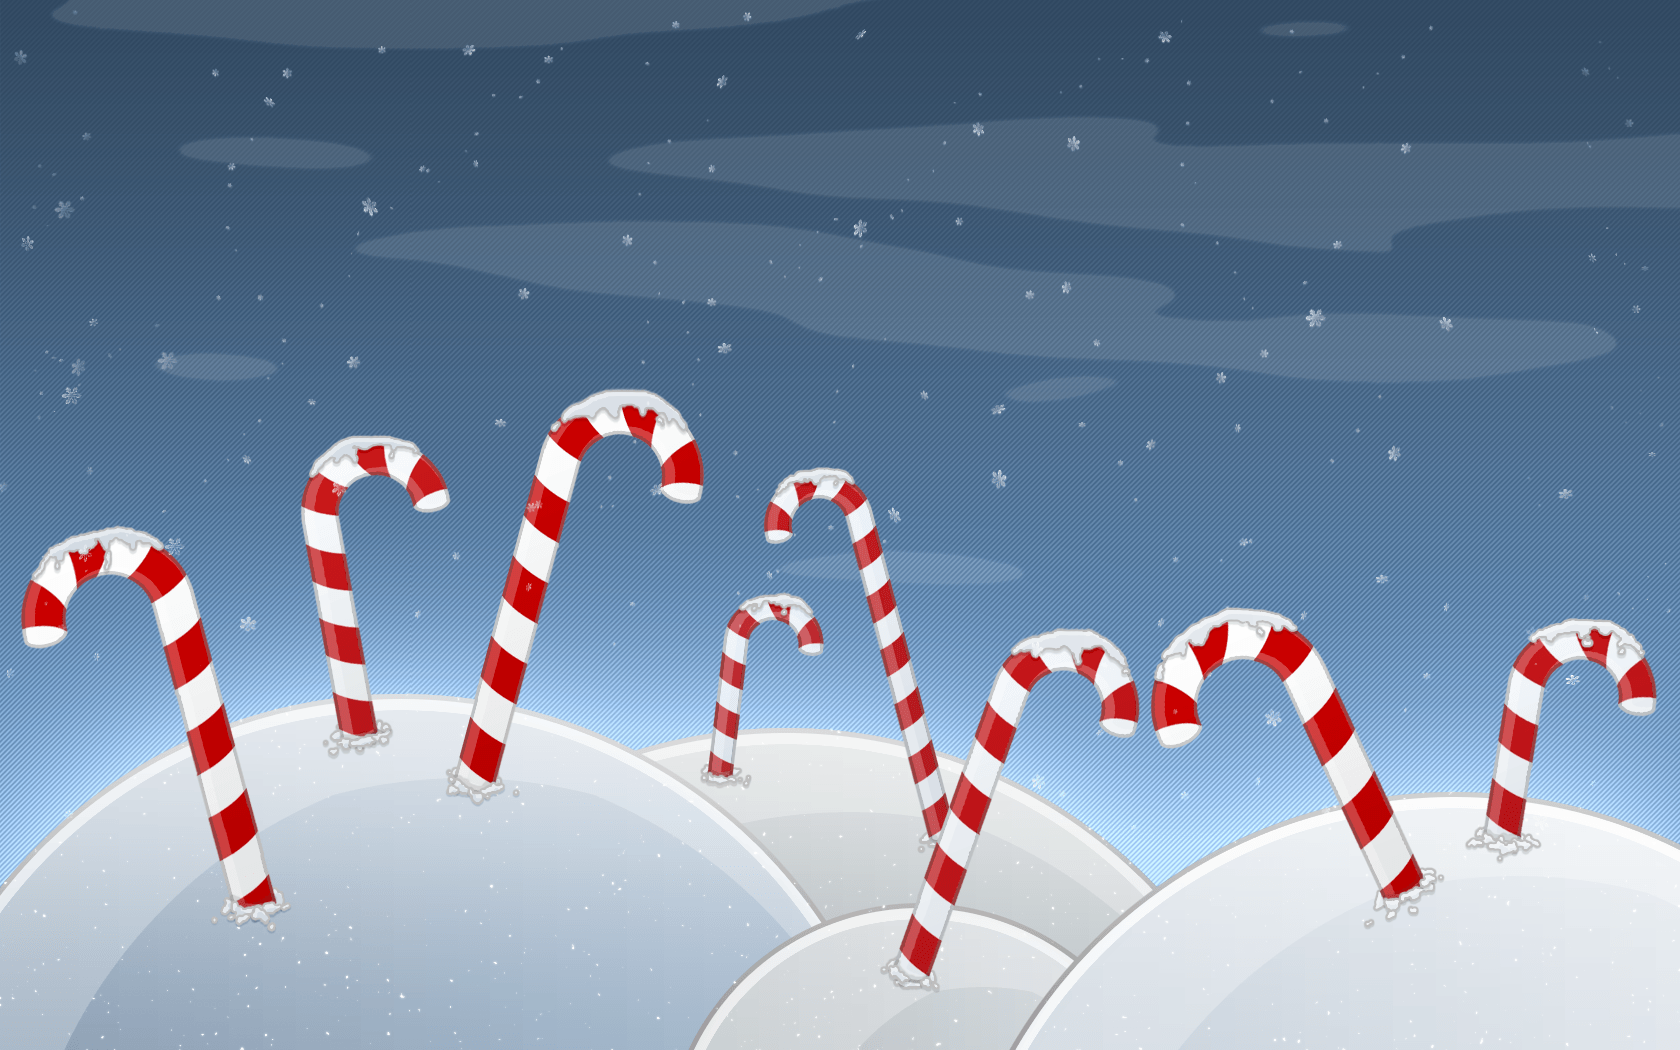 Christmas Candy Cane Wallpapers